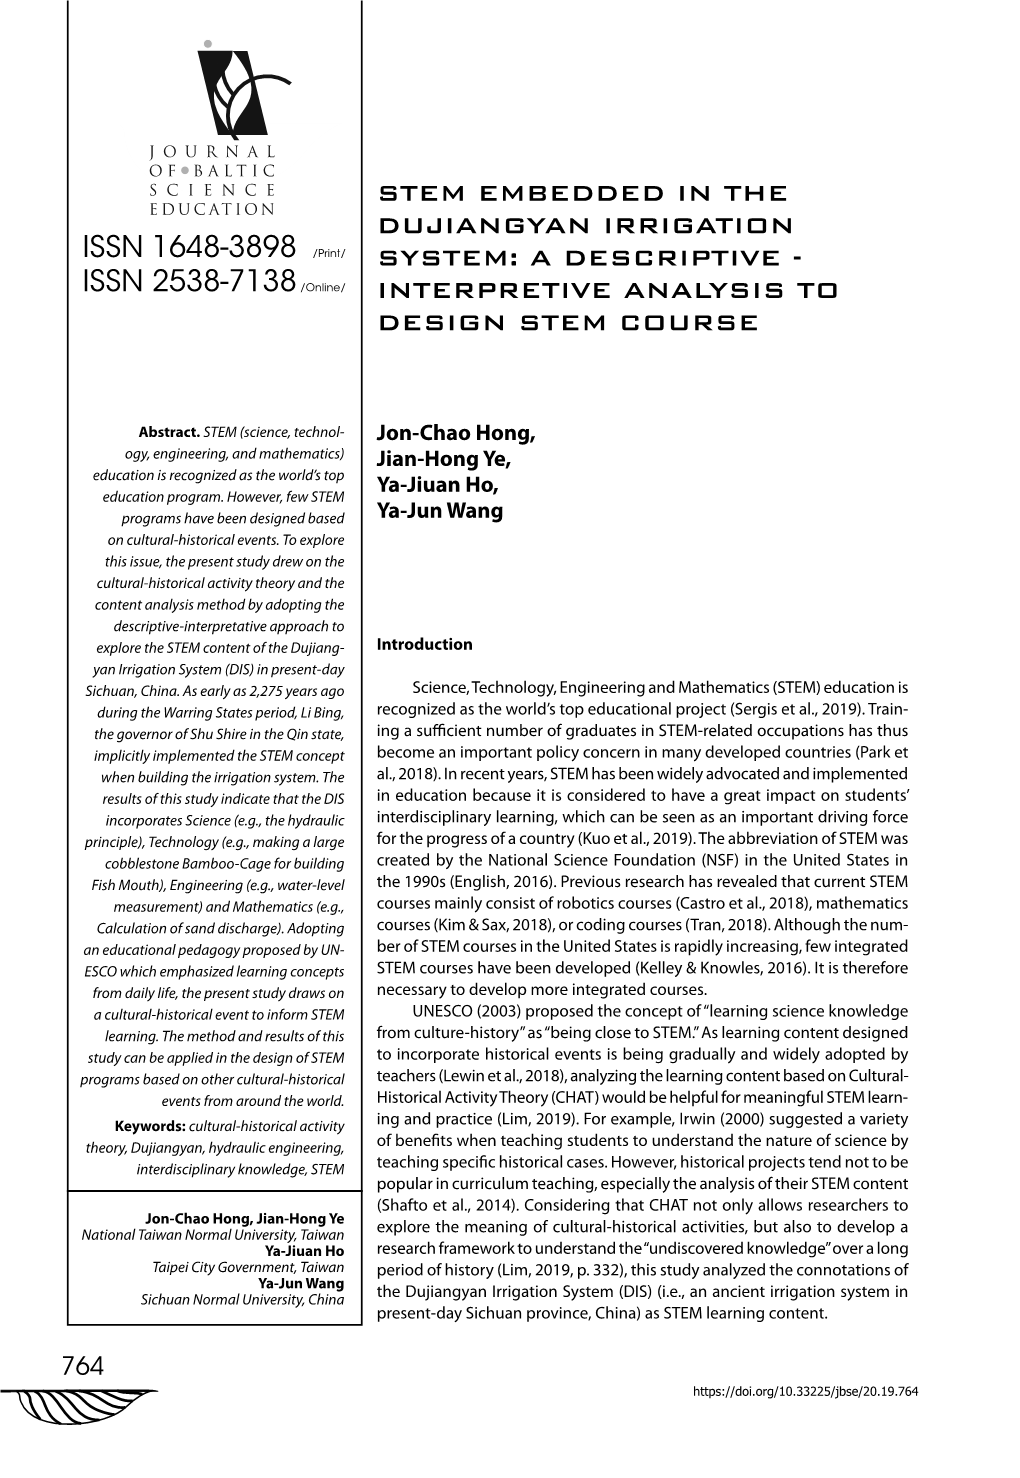 ISSN 2538-7138/Online/ STEM EMBEDDED in the DUJIANGYAN IRRIGATION SYSTEM